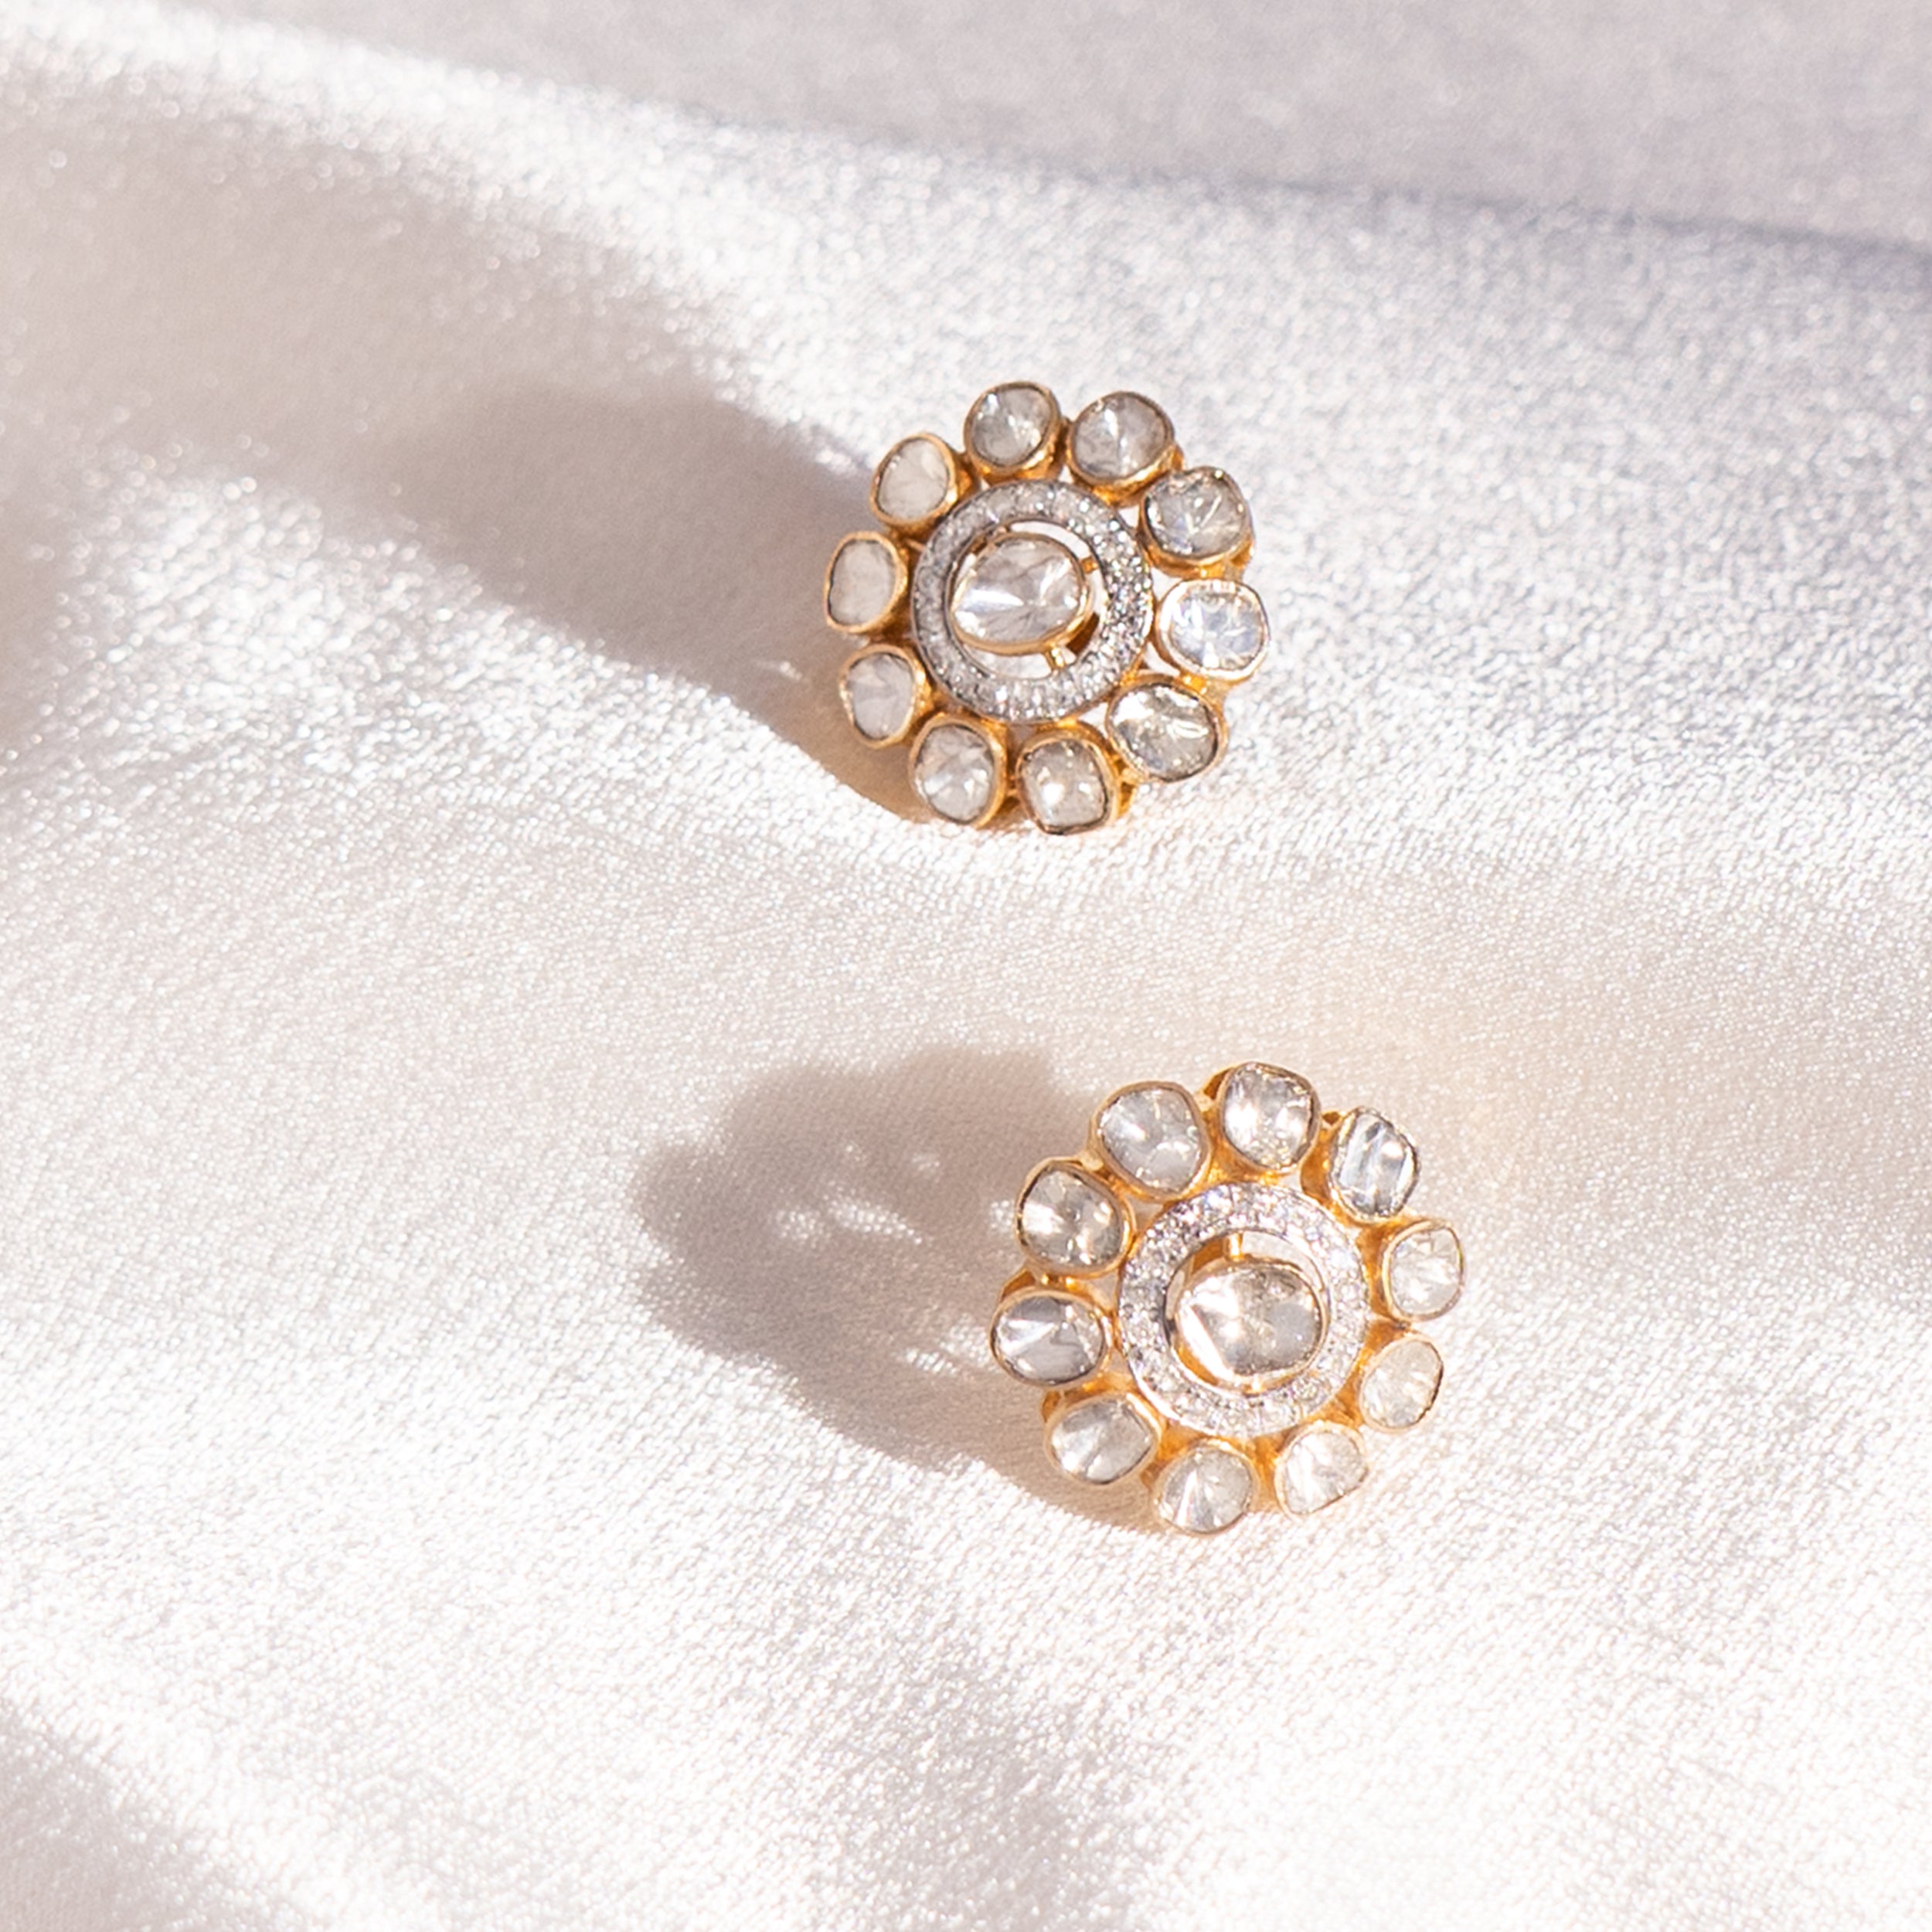 18K gold earrings with intricate floral forms, mesmerizing polki diamonds, and brilliant-cut diamond-adorned petals. 